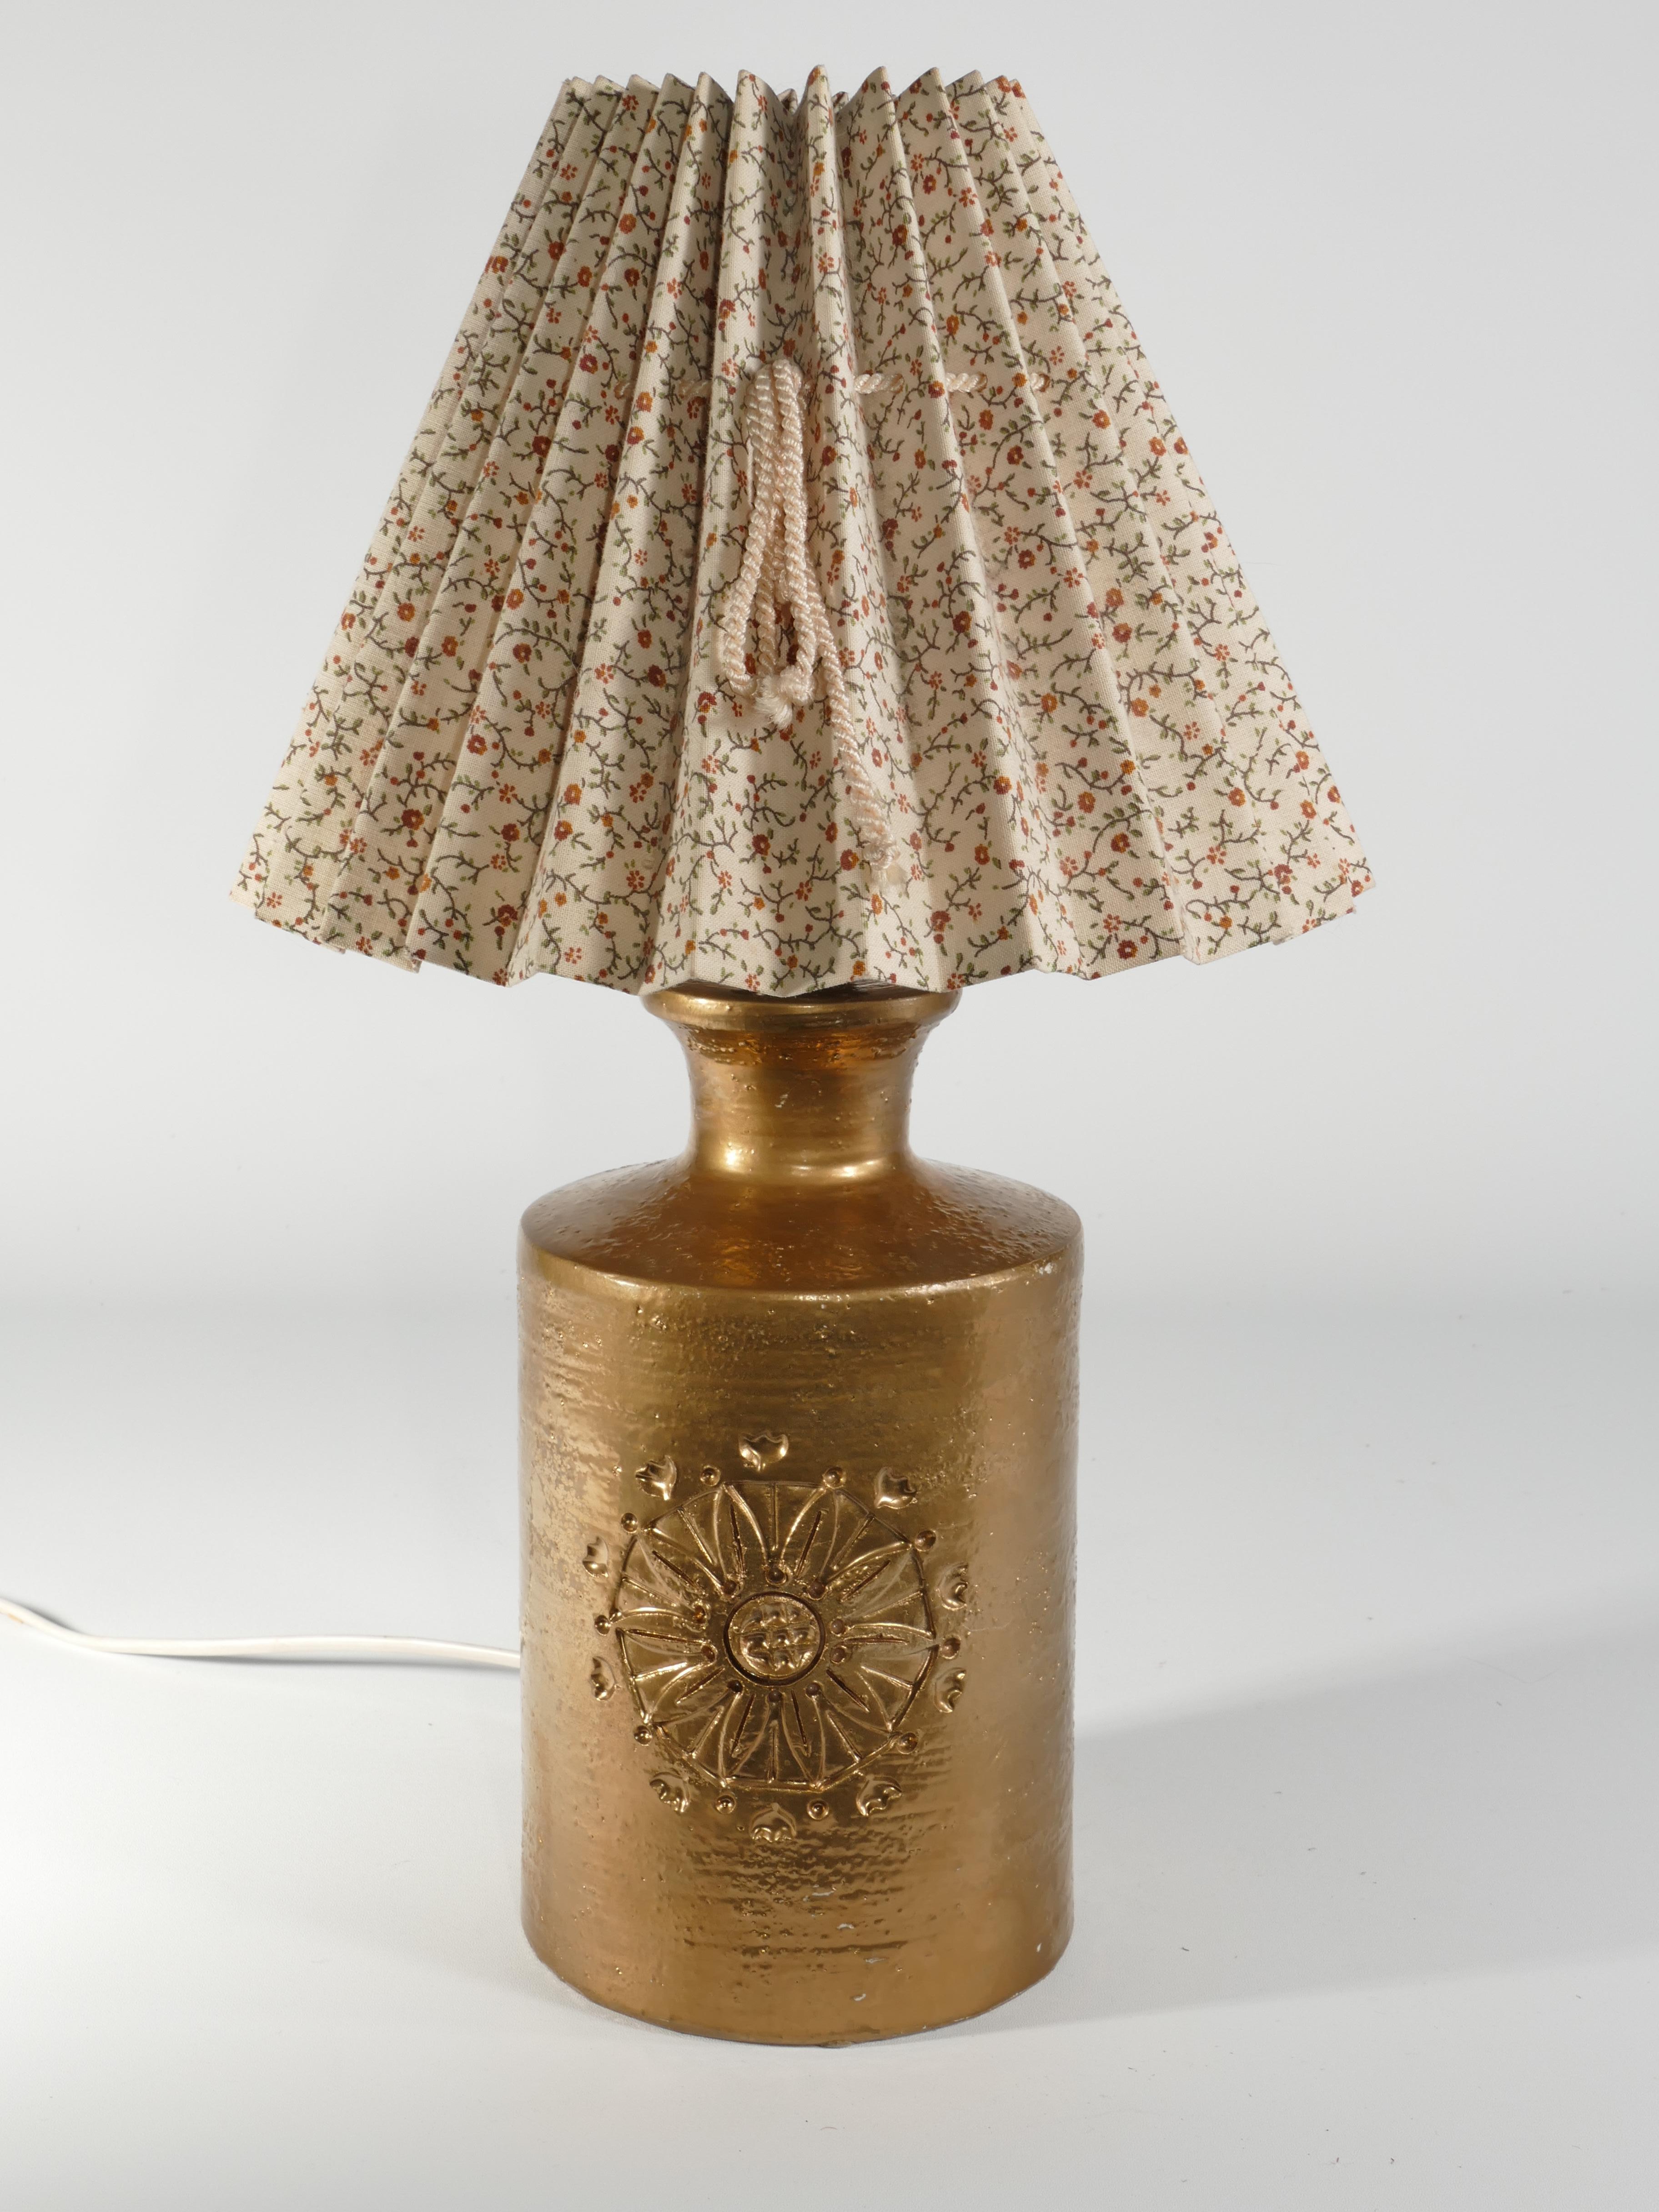 Hand-Crafted Gold Glazed Ceramic Table Lamp by Bitossi for Bergboms, 1970's For Sale